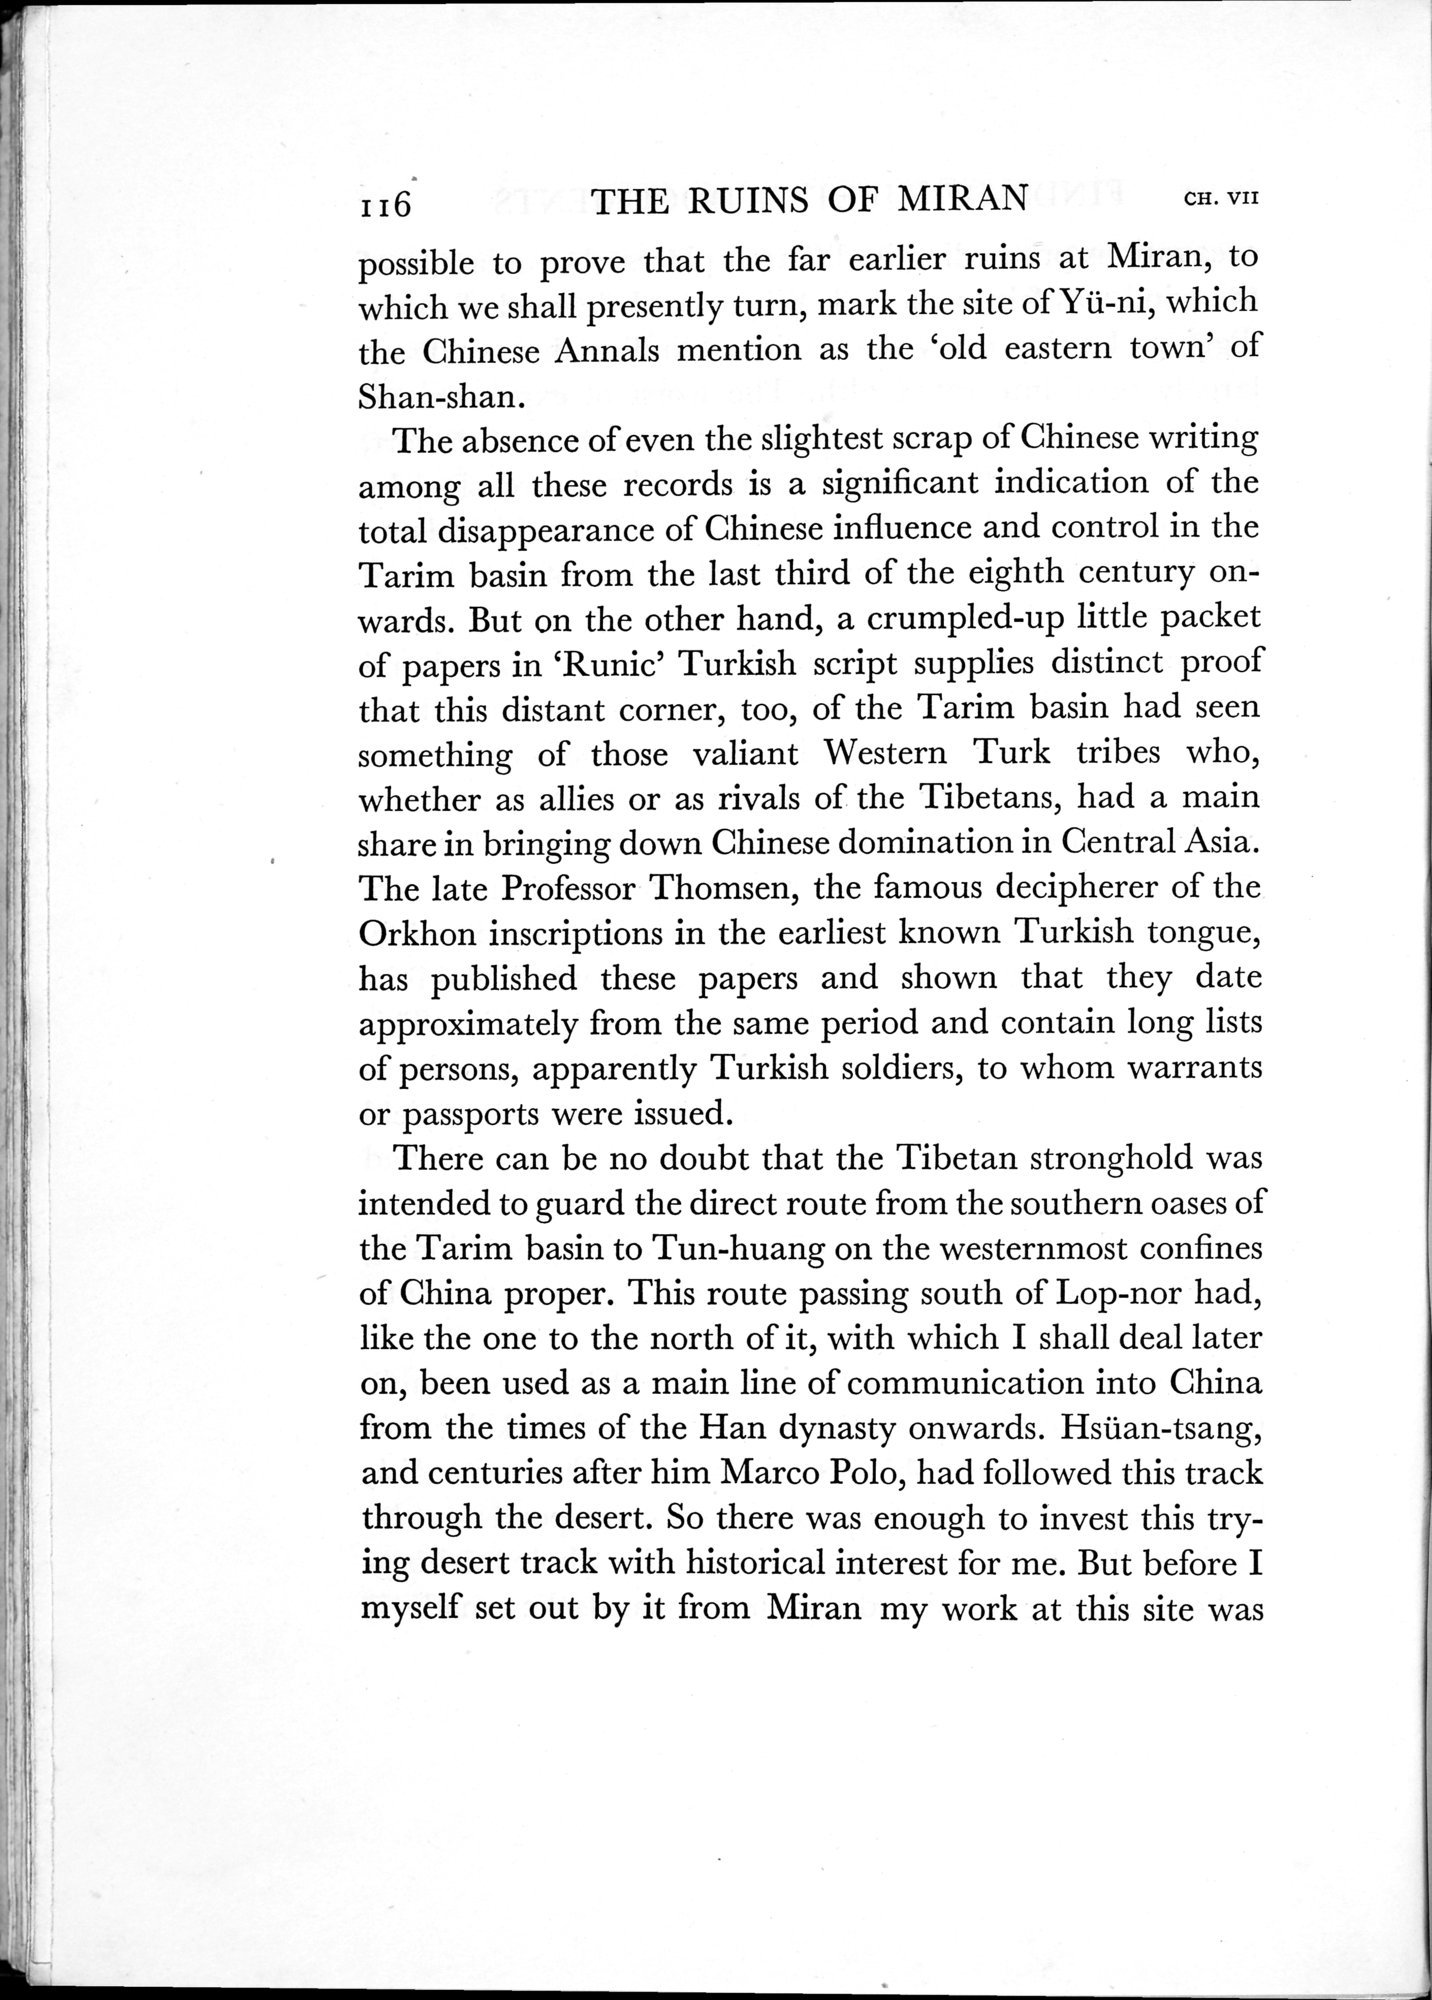 On Ancient Central-Asian Tracks : vol.1 / Page 204 (Grayscale High Resolution Image)